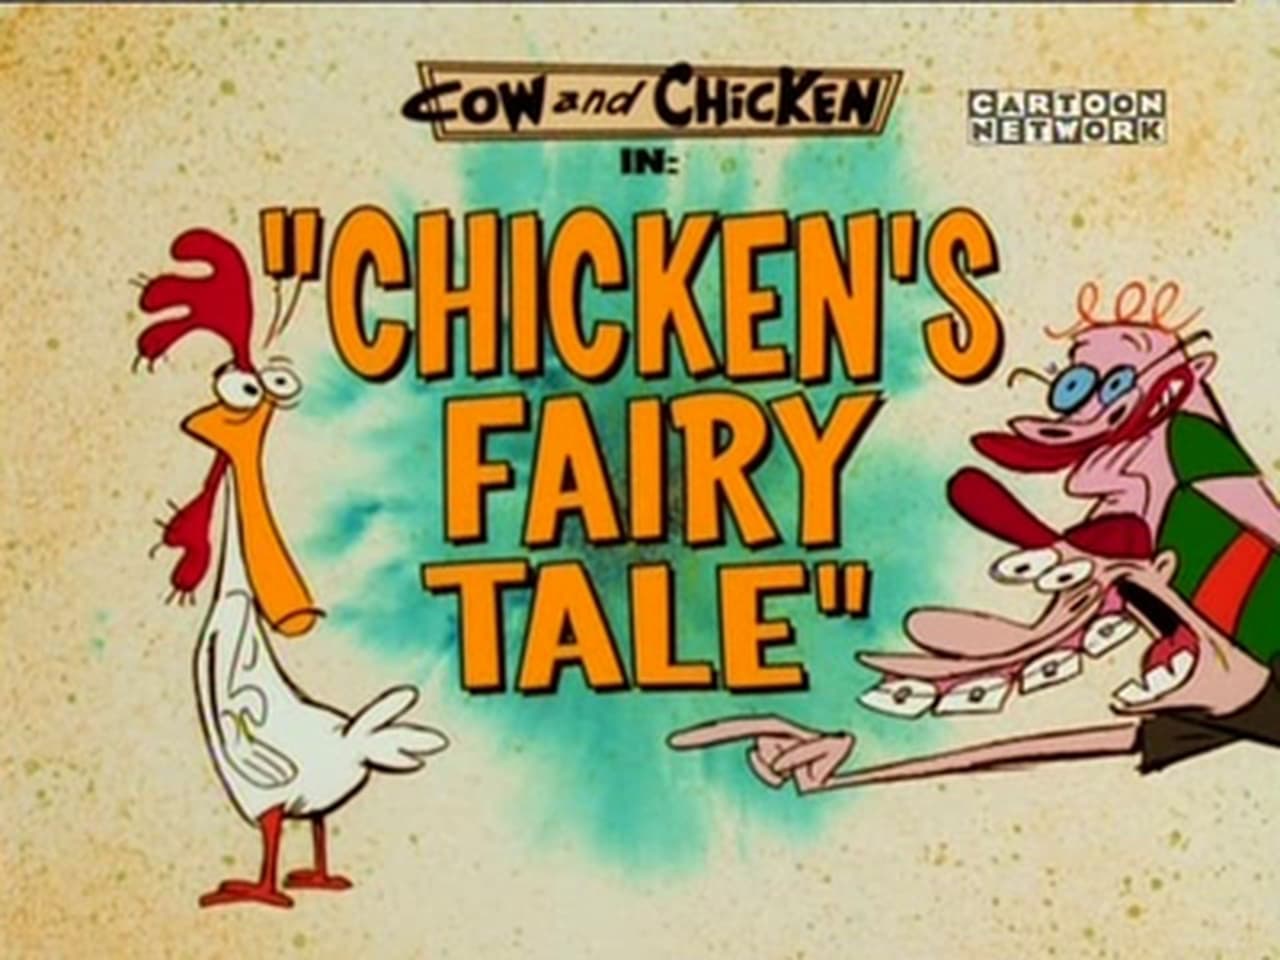 Chickens Fairy Tale